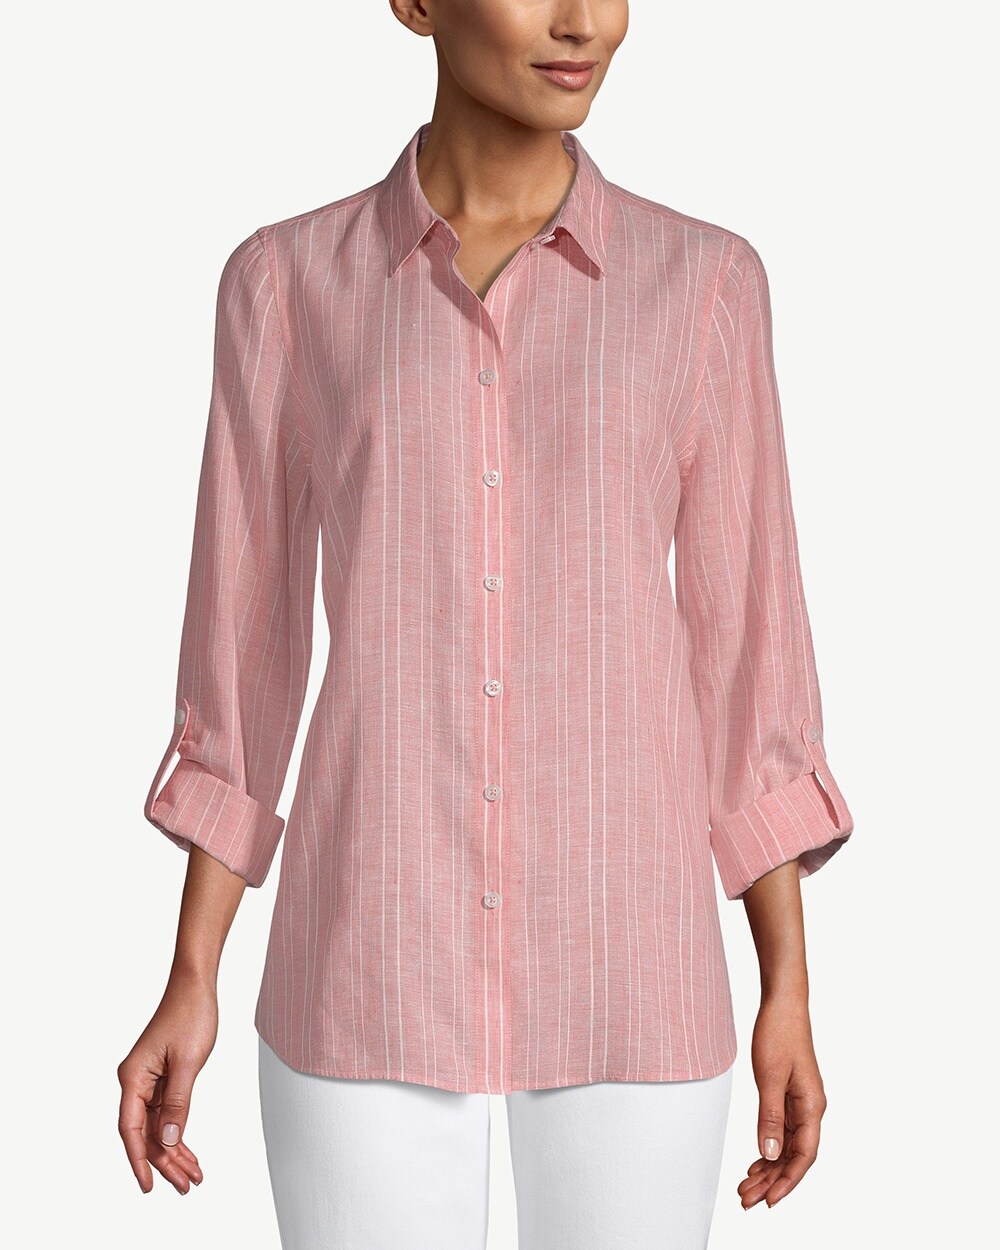 No-Iron Linen Double-Stripe Roll-Tab Sleeve Shirt - Chico's